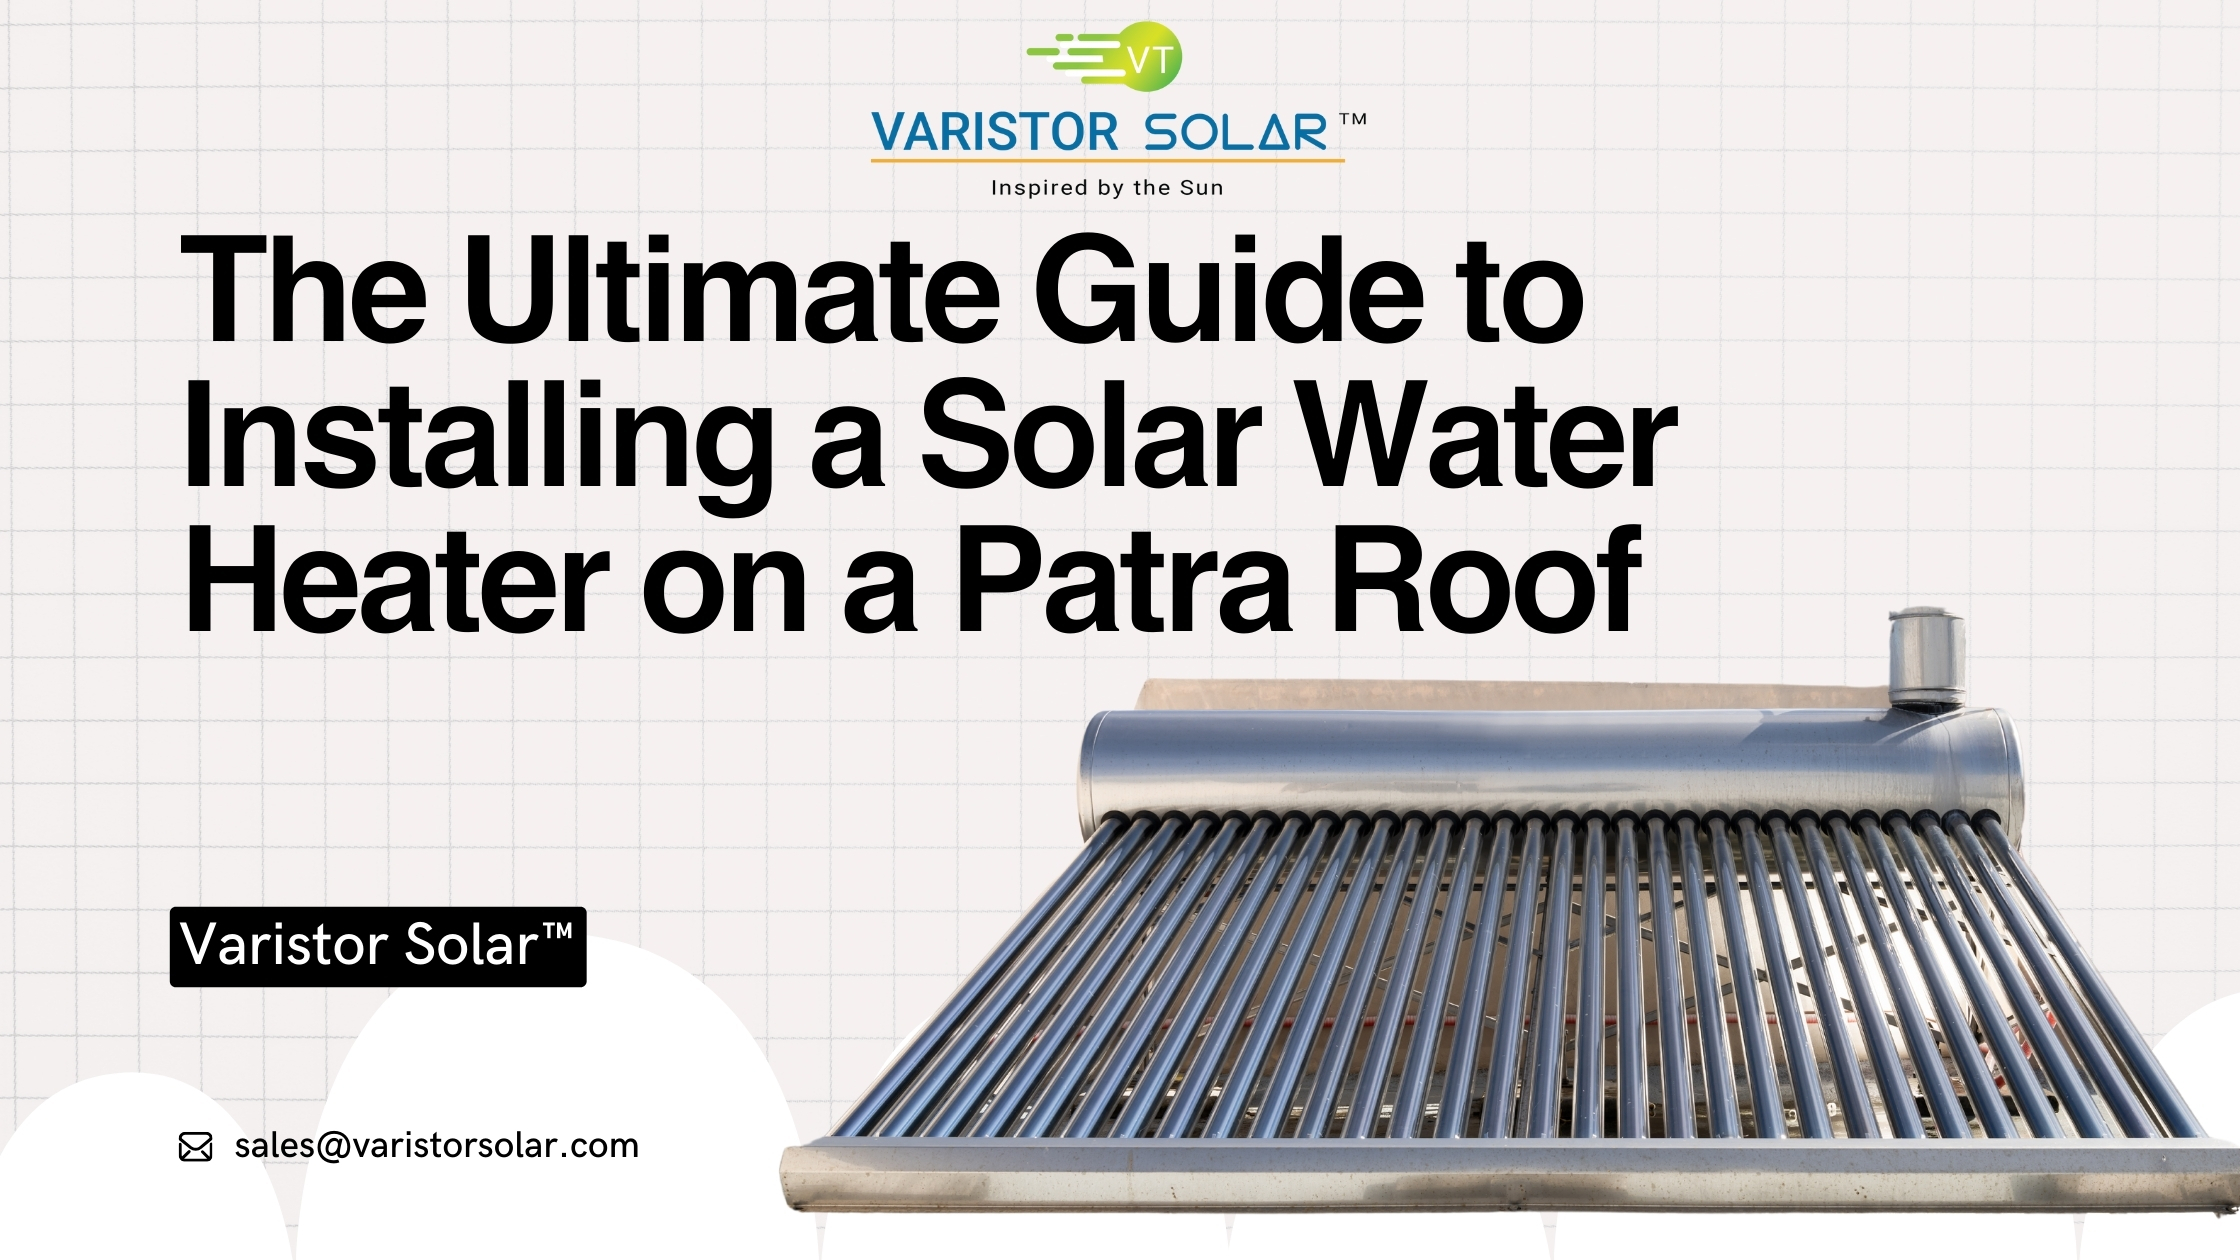 can solar water heater be fitted on patra